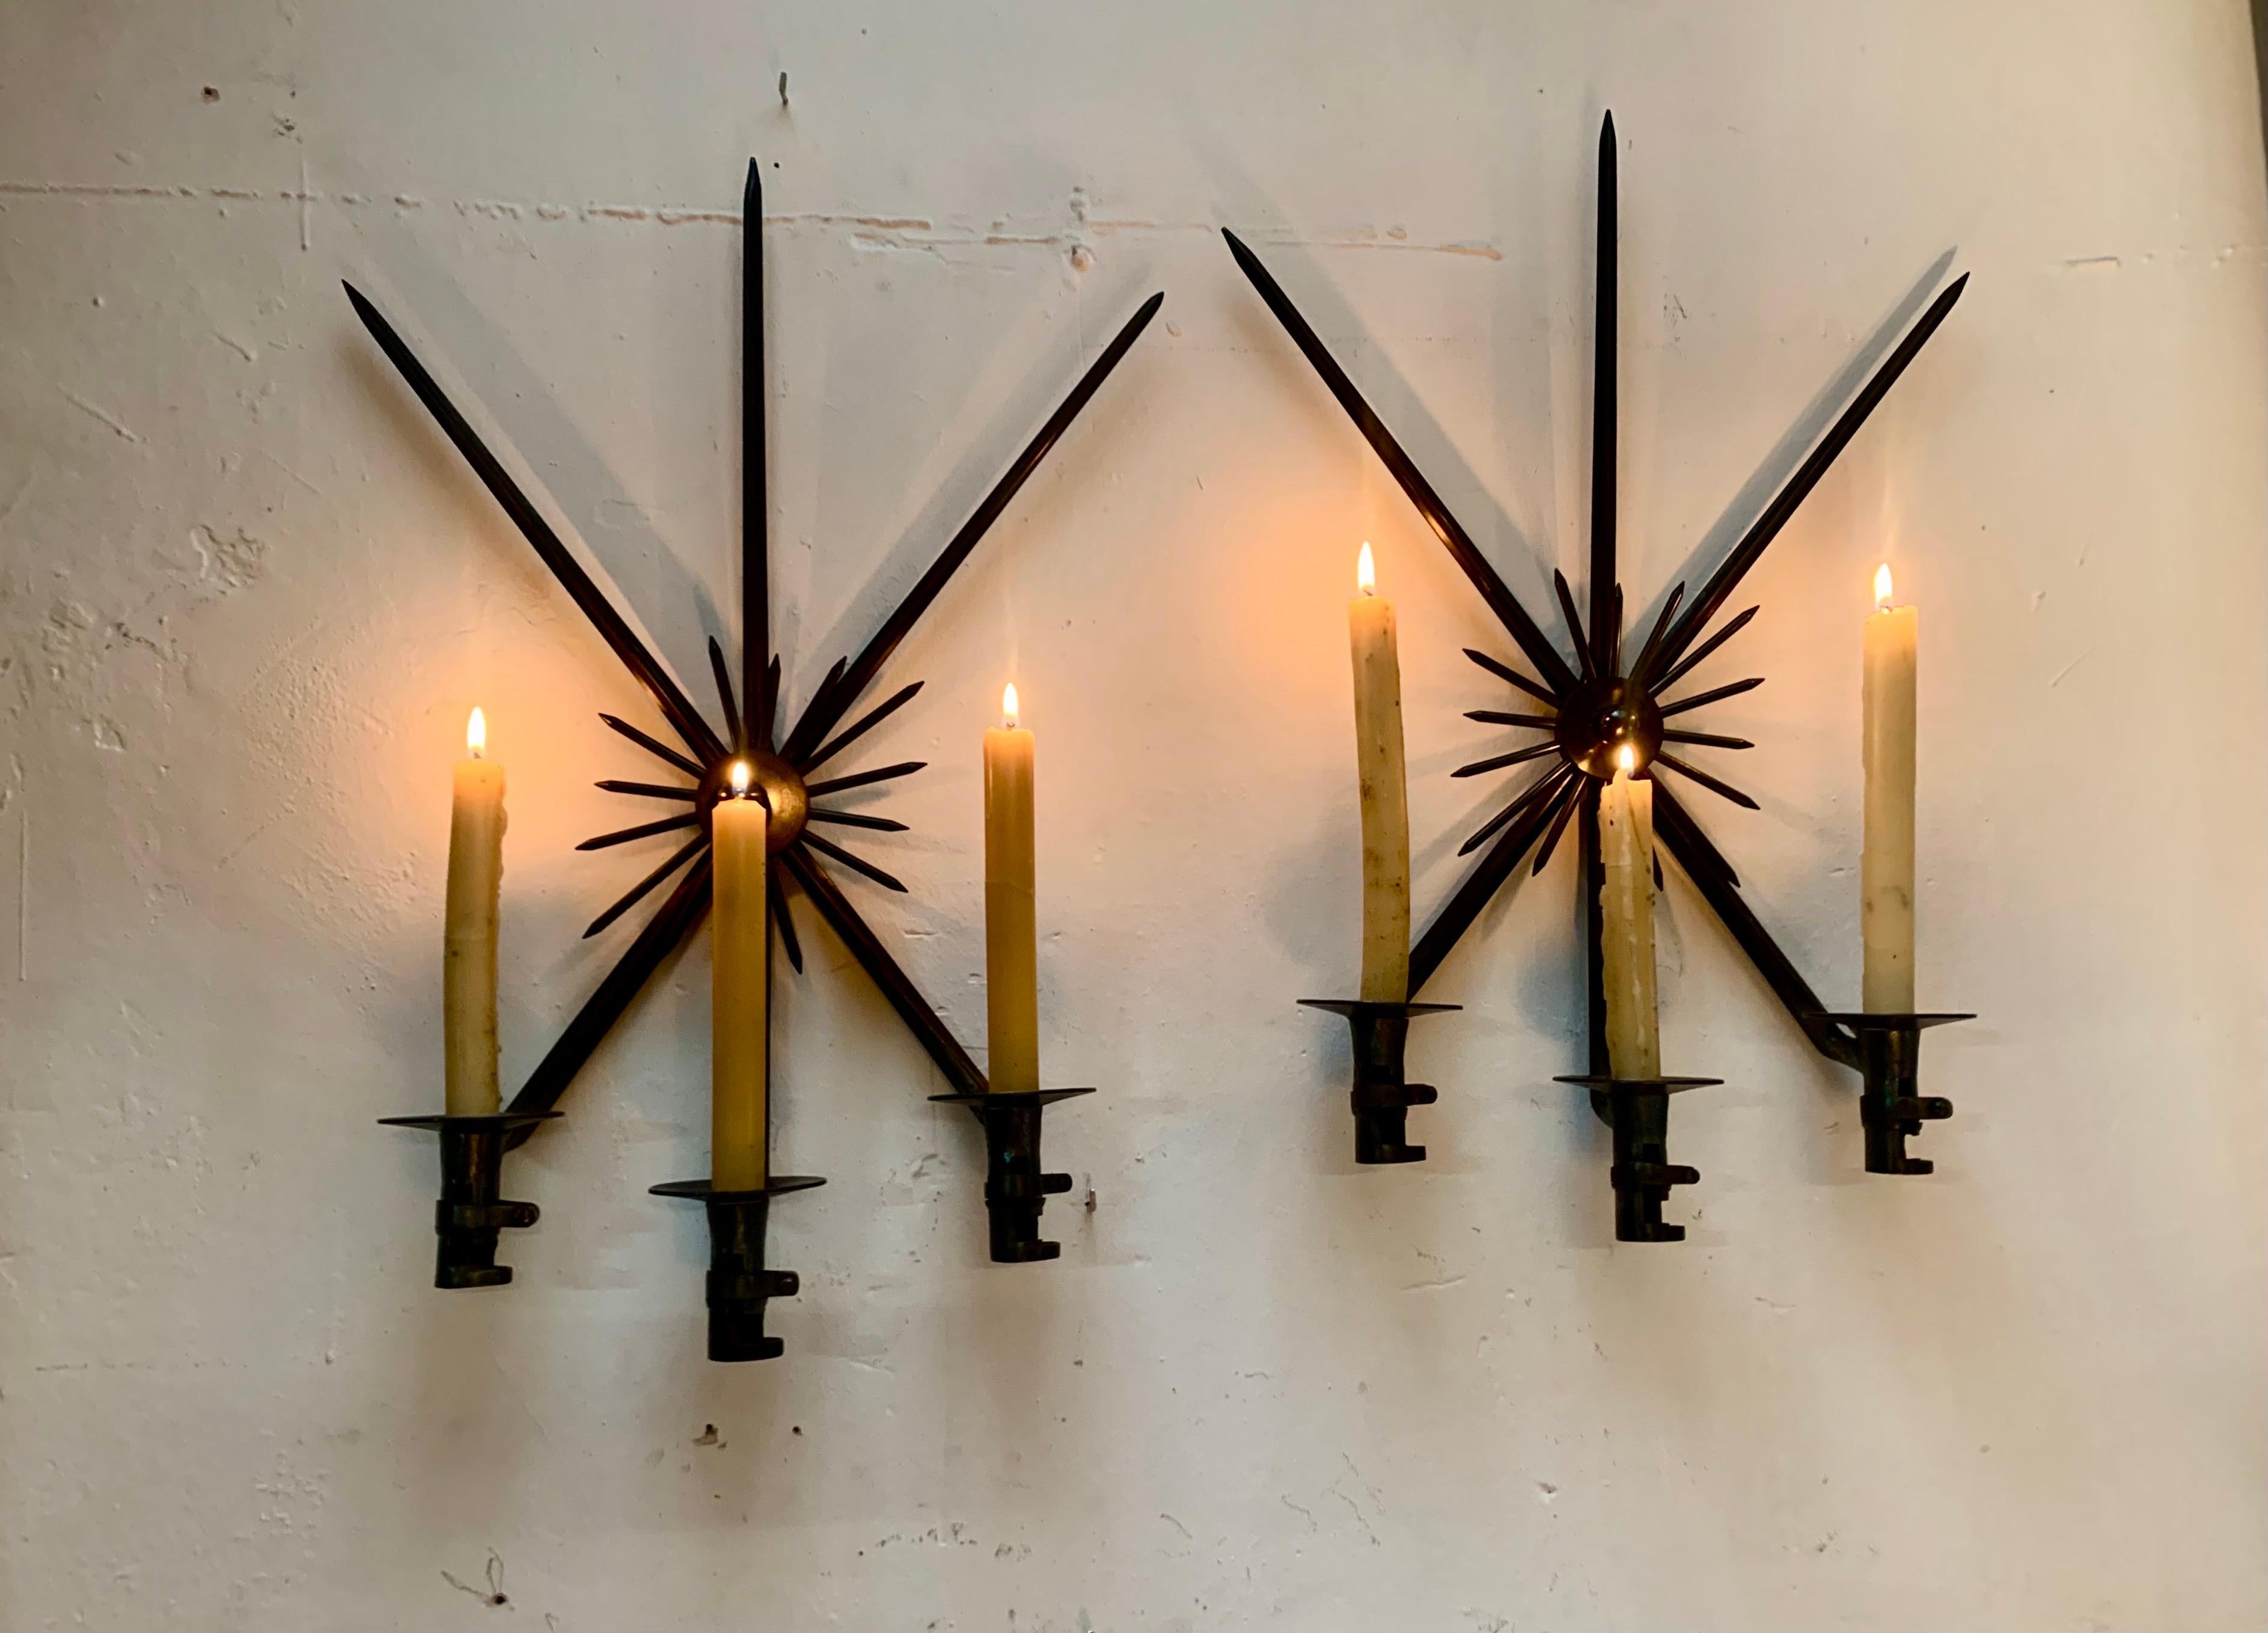 Pair of Apppliques Candle Sconces Made of Antique Bayonets For Sale 5